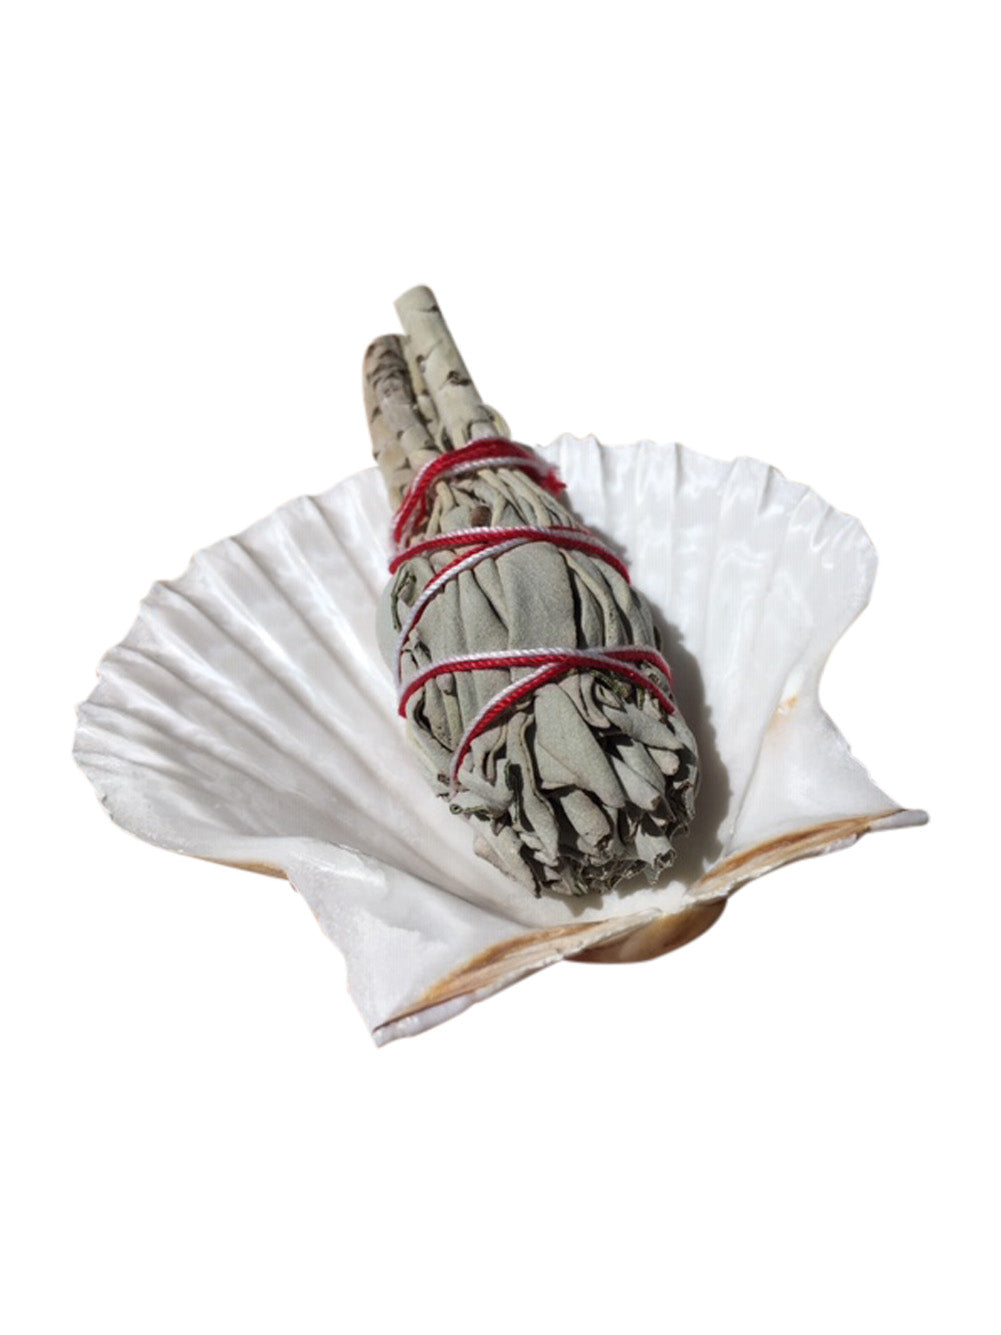 Californian White Sage Smudge Stick with Scallop Shell and Wooden Tripod Stand